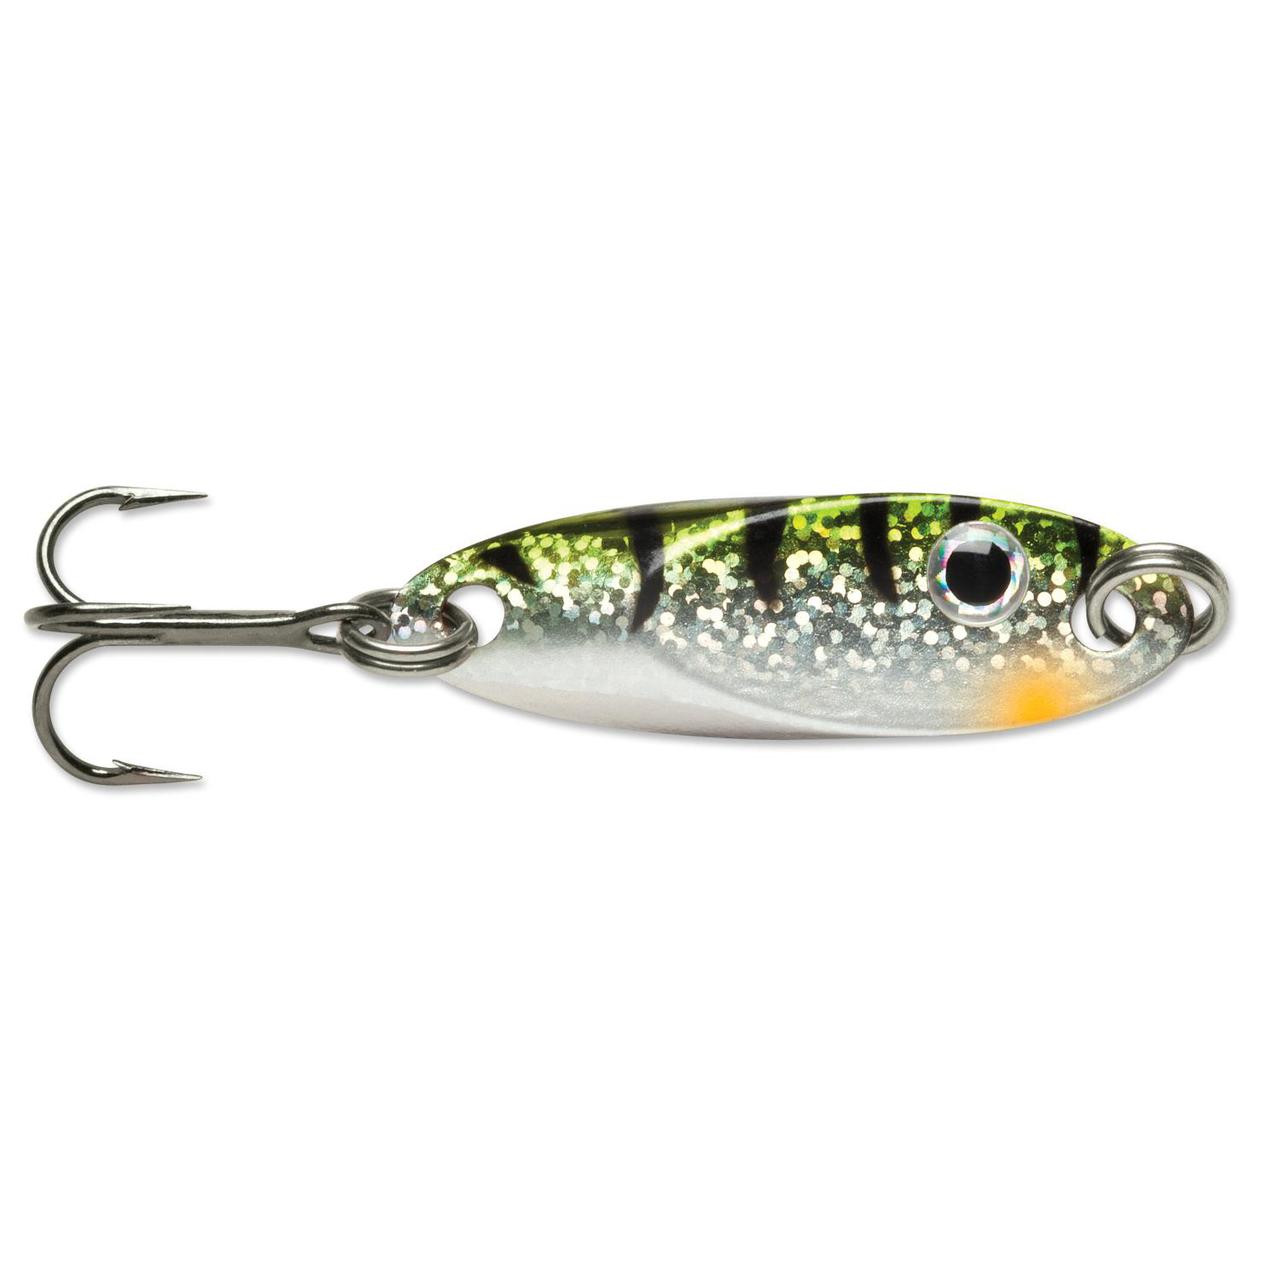 vmc lures, vmc lures Suppliers and Manufacturers at